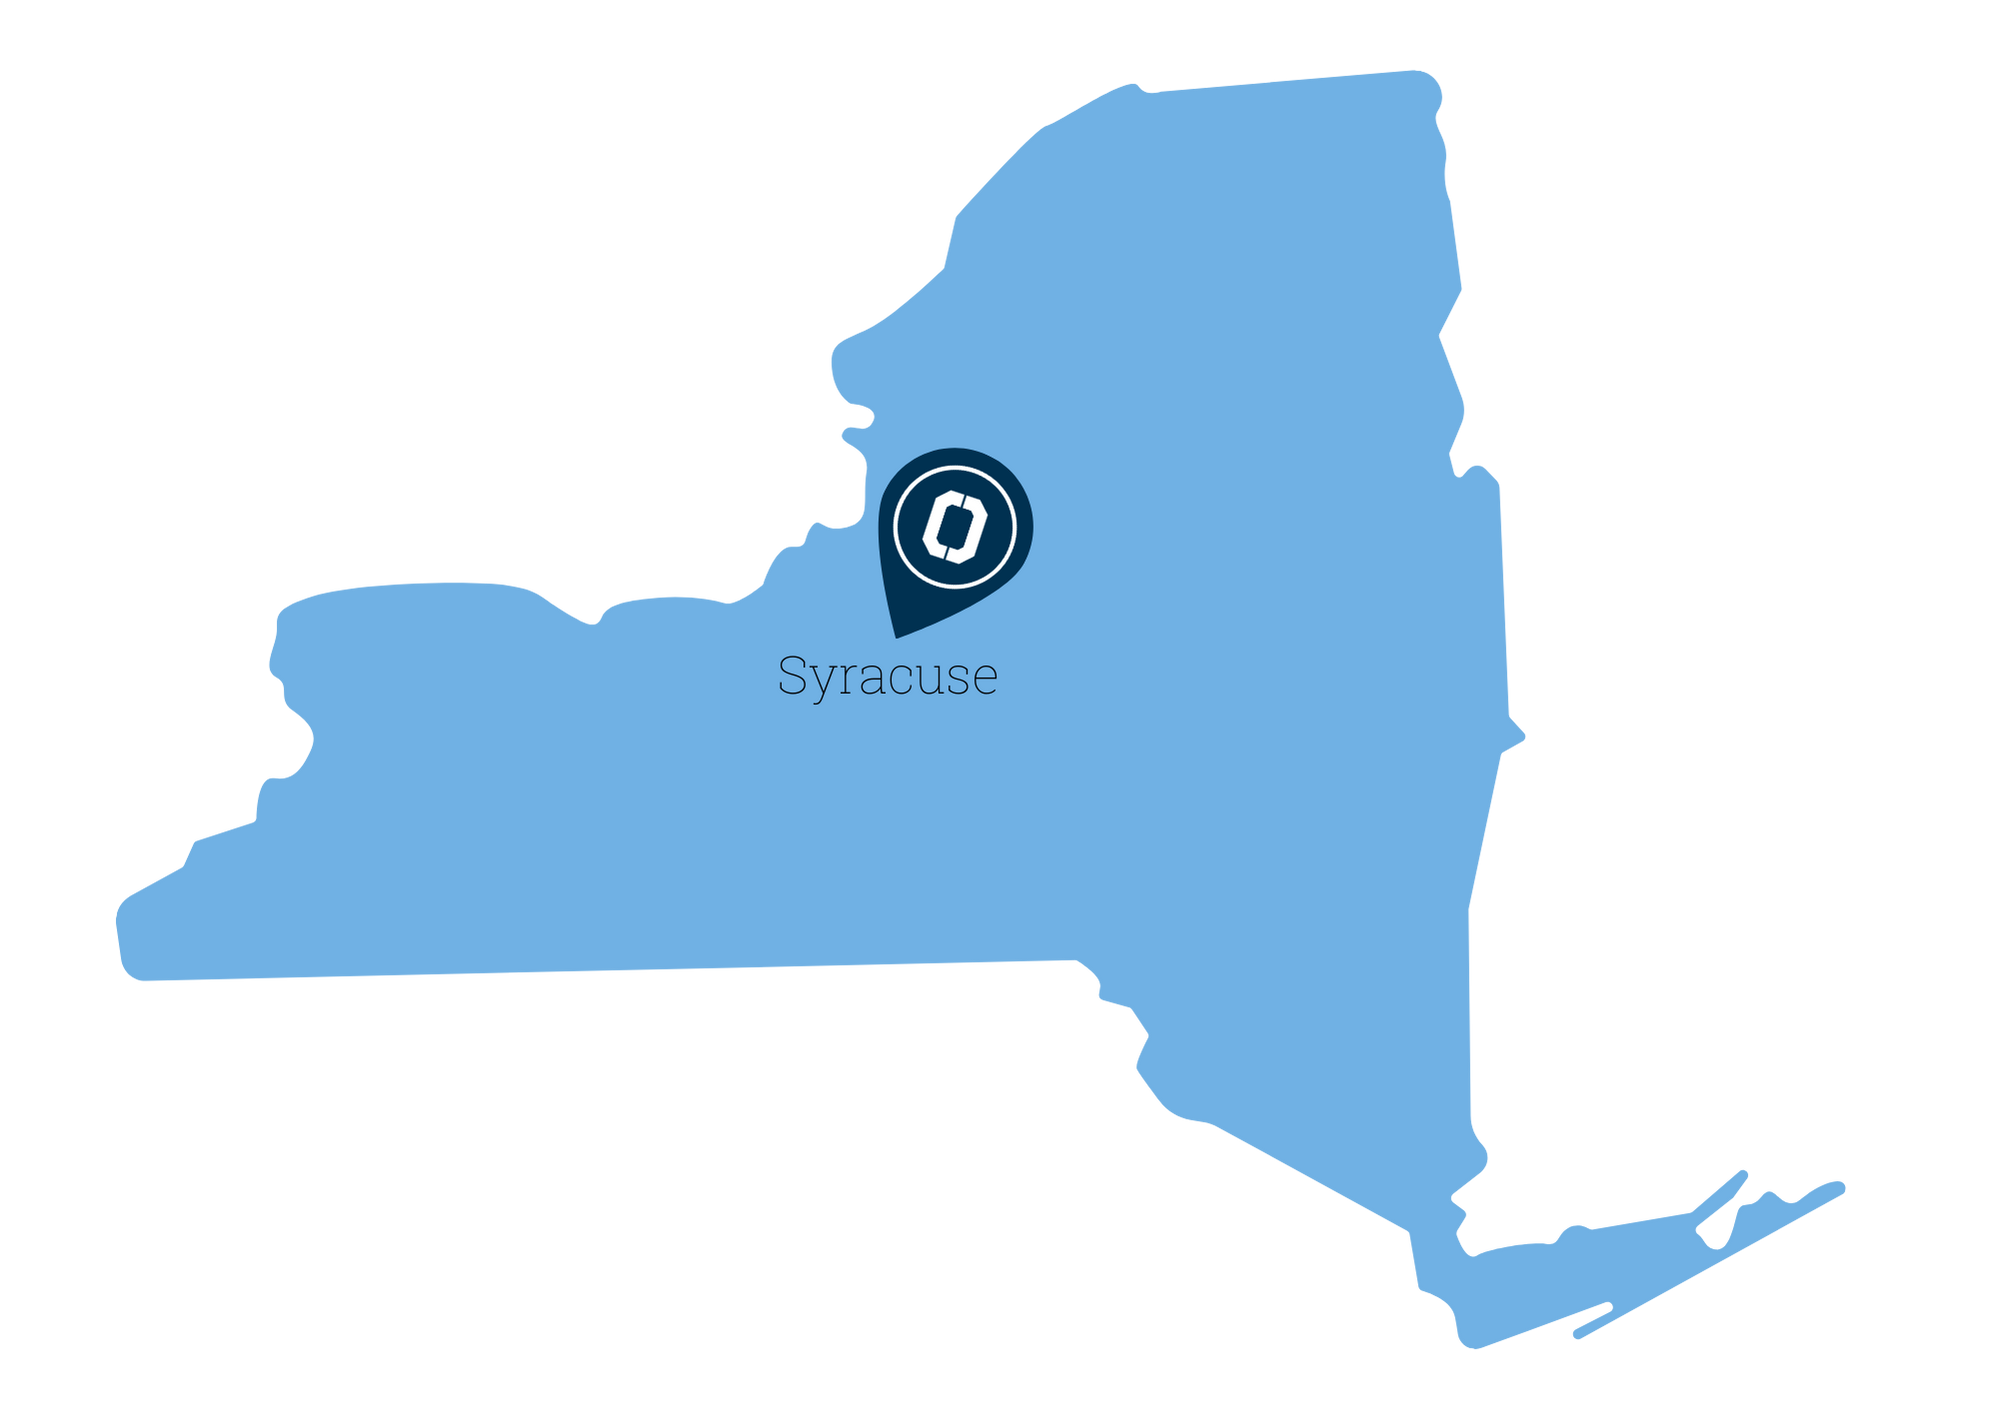 Map of NY with OCC marked